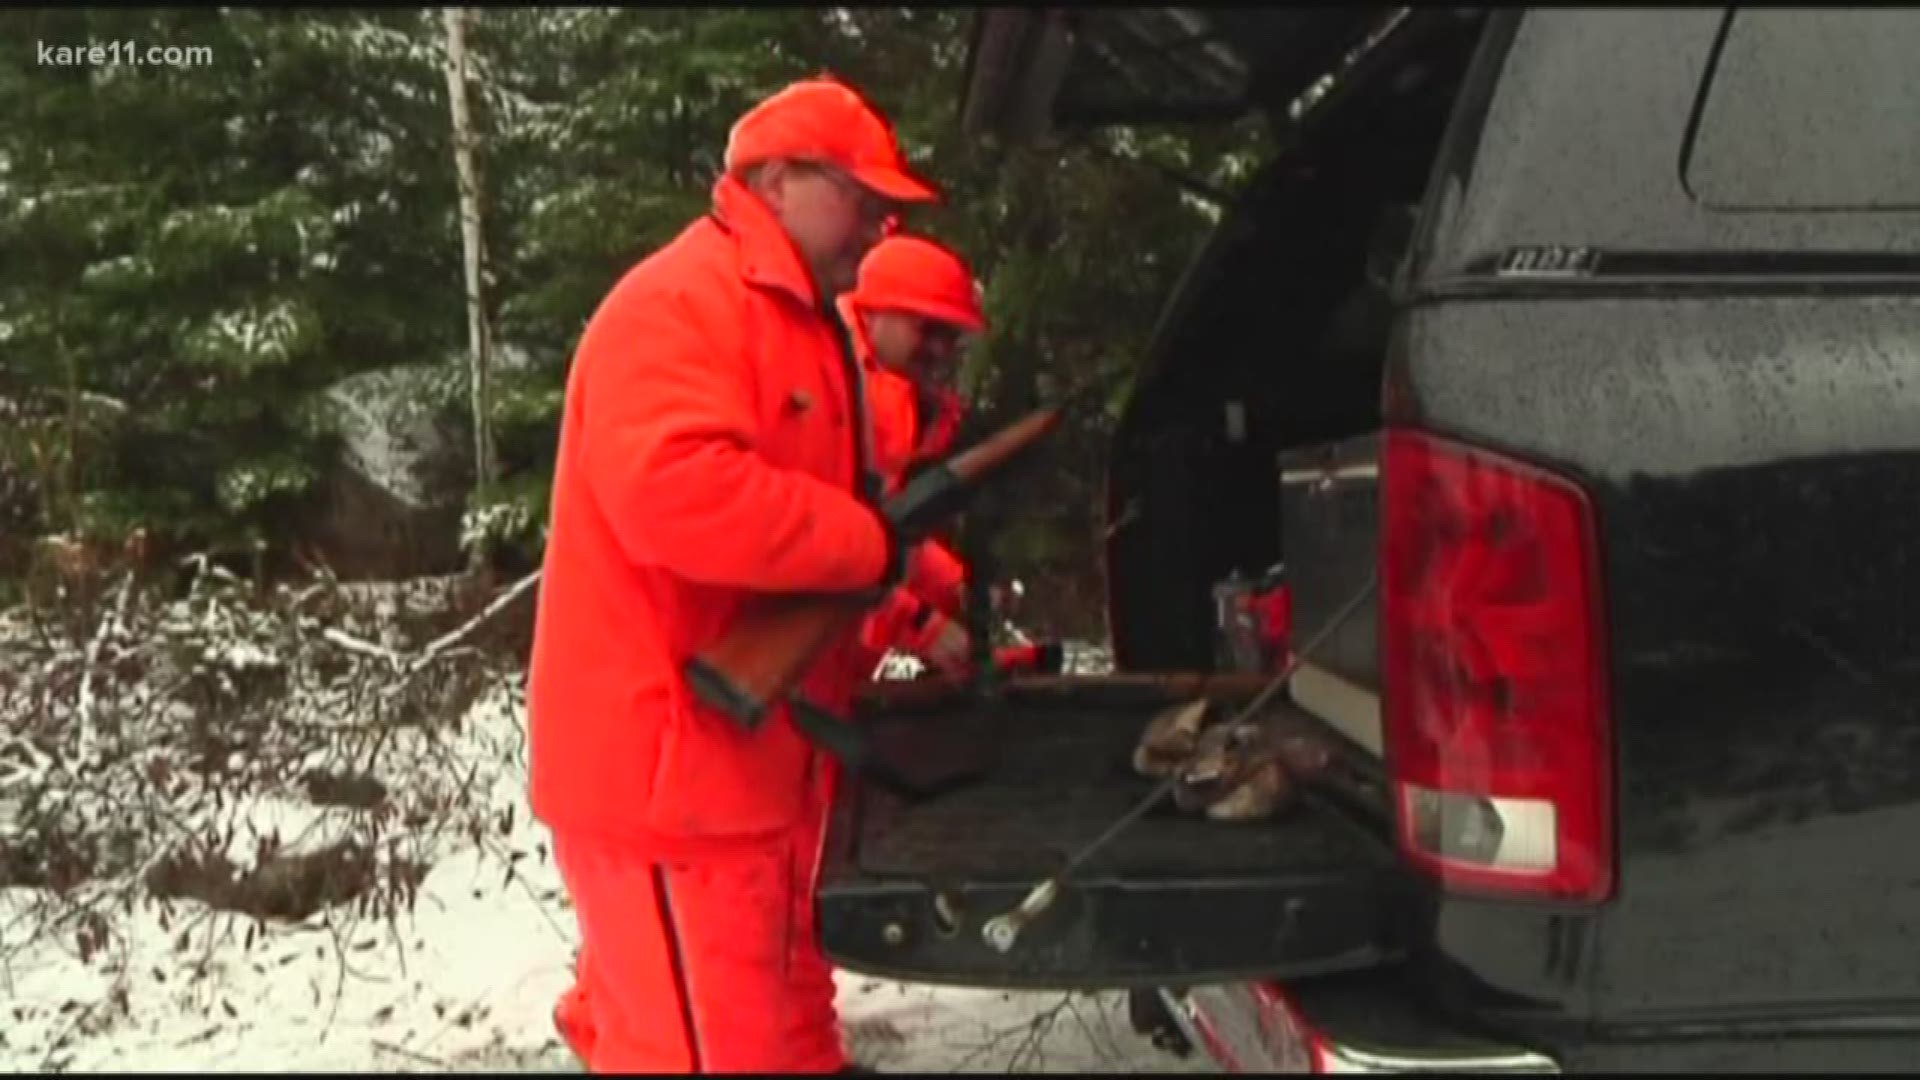 Proper education and preparation will help to make the hunting season successful and safe.